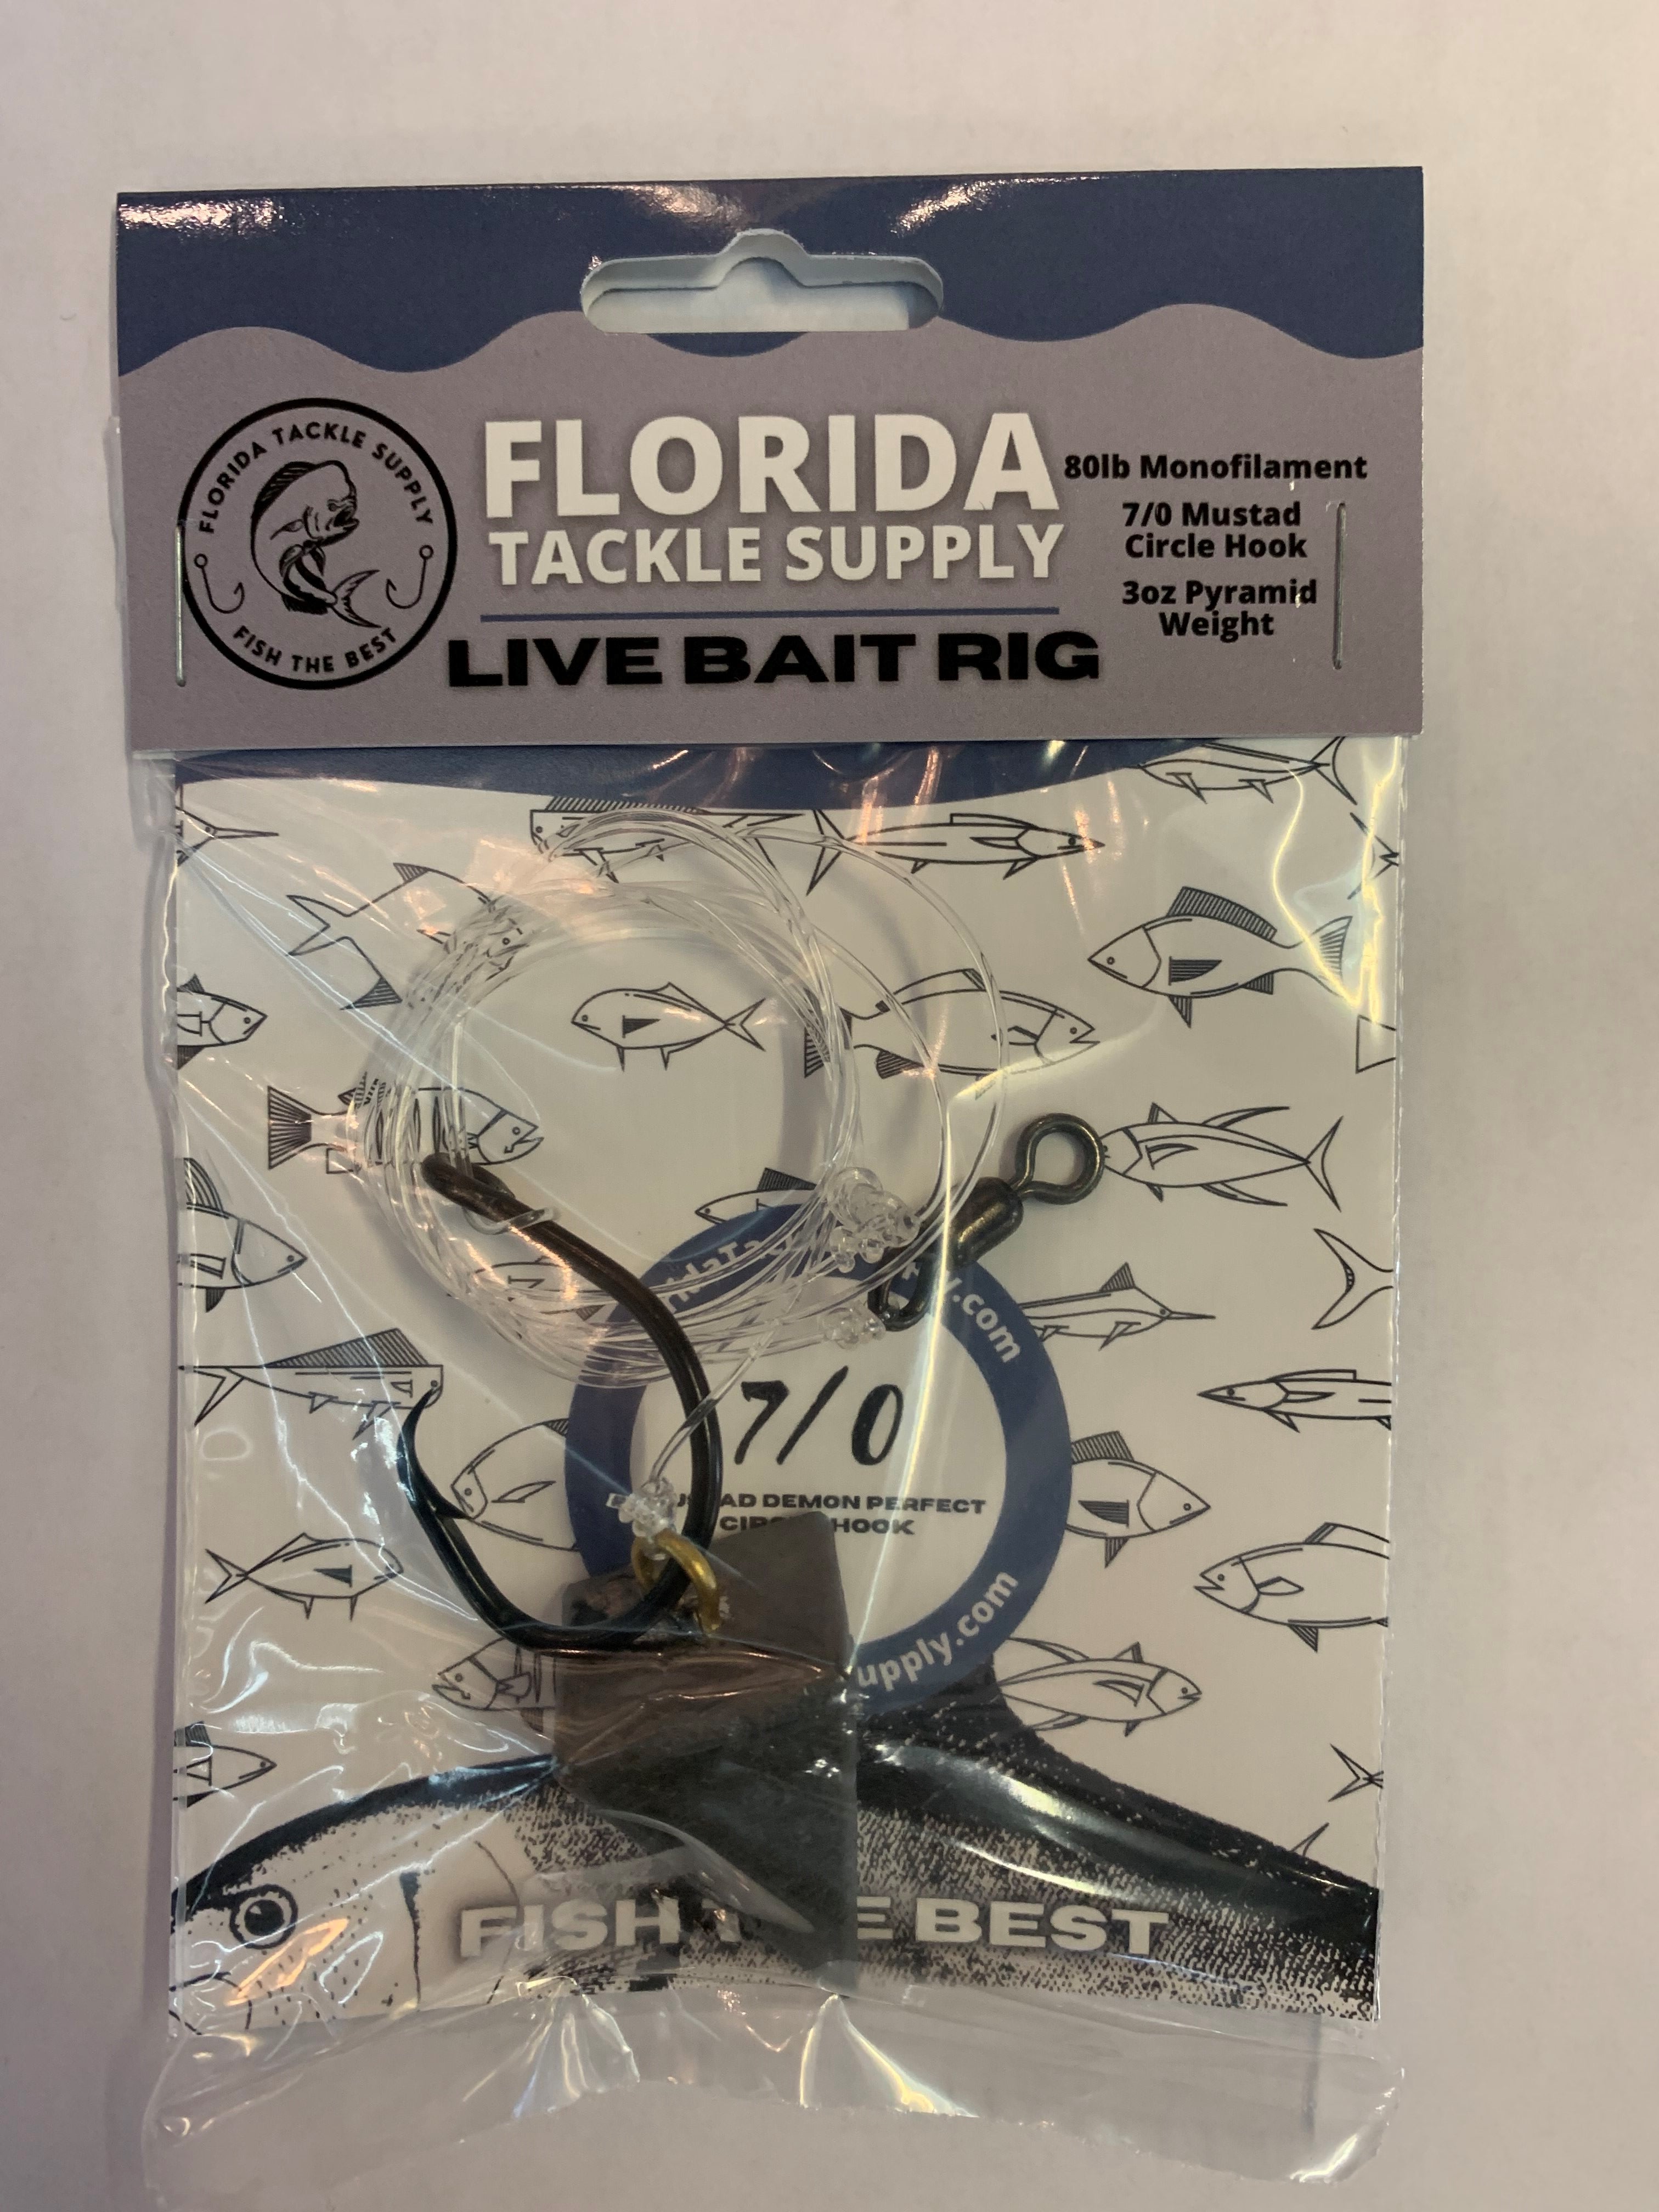 Rigs - Florida Tackle Supply - Live Bait Rig